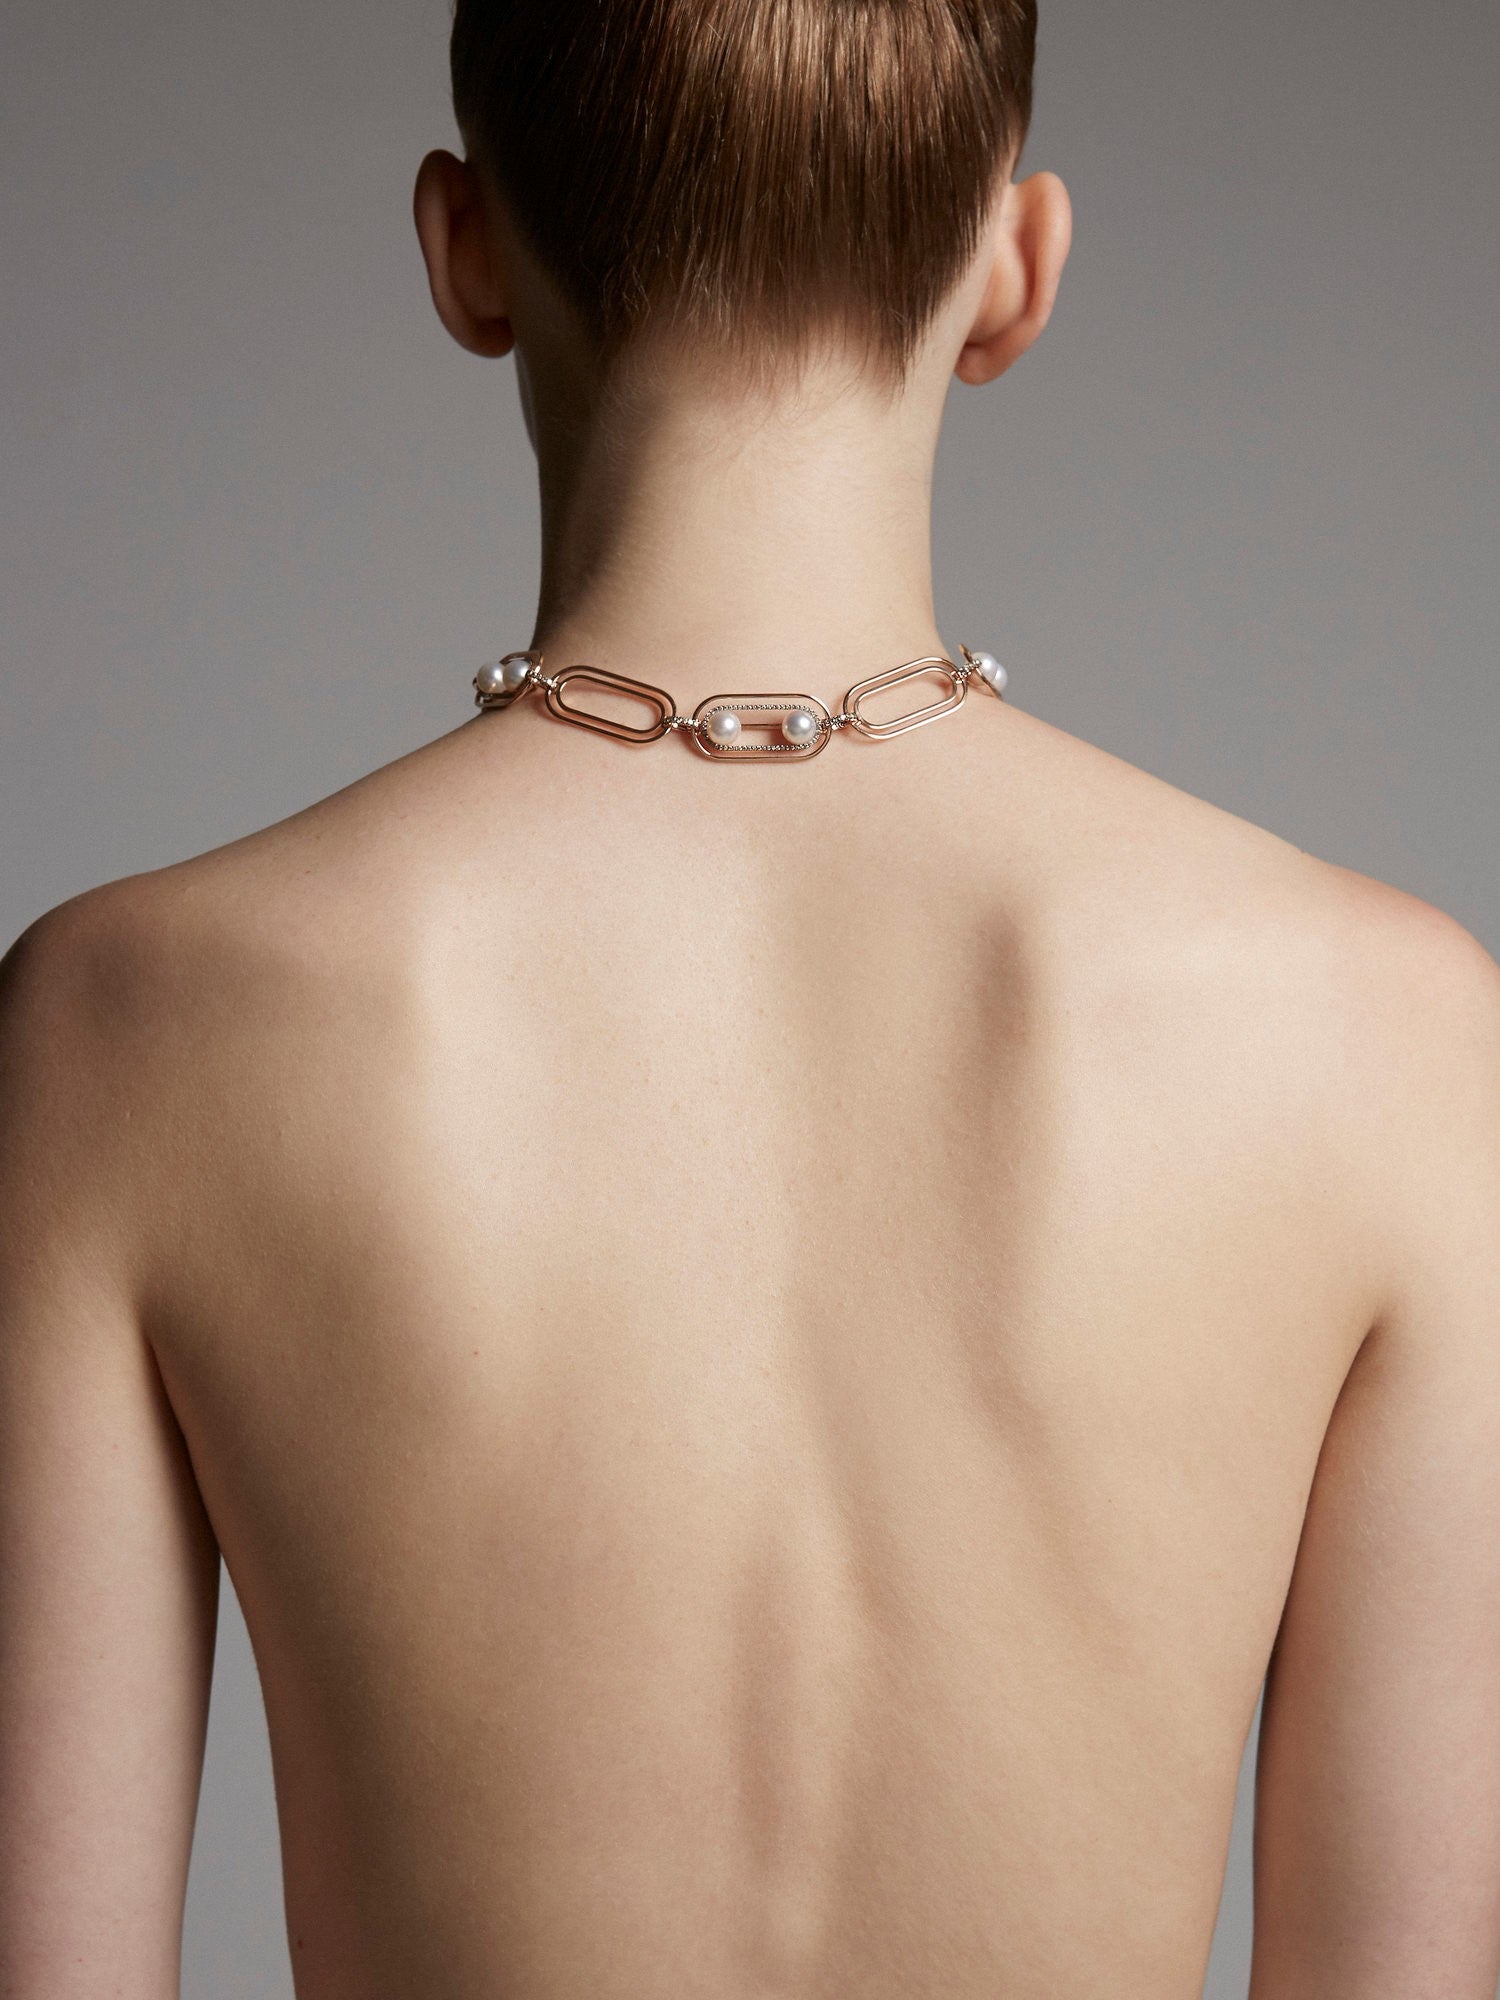 Convertible Jewellery: Transform These Pieces To Match Your Style